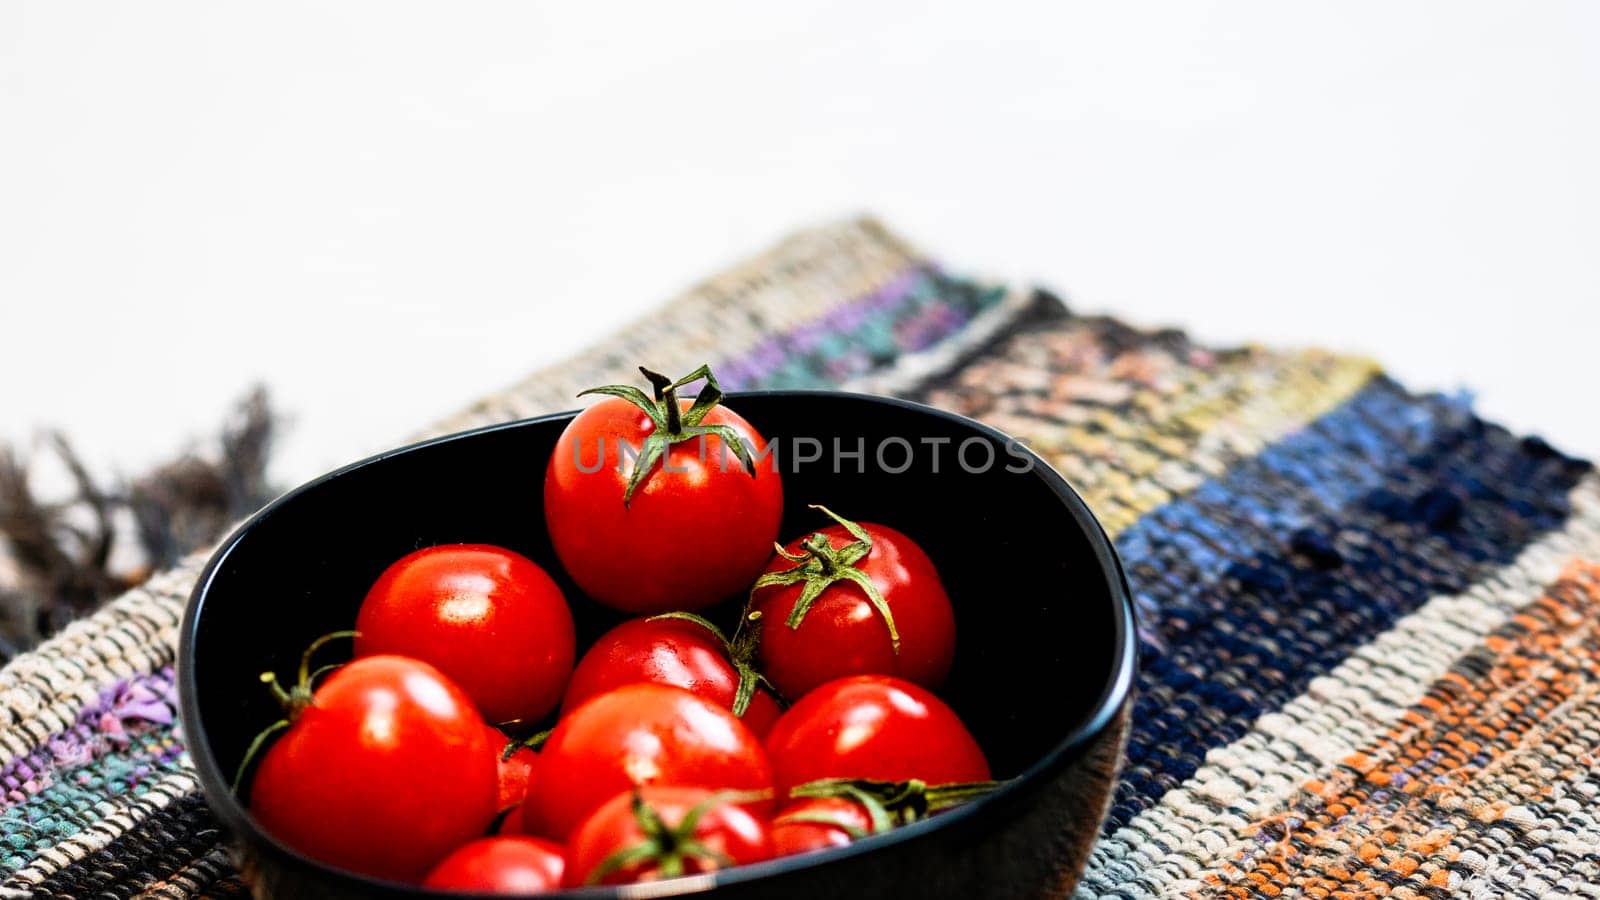 Detail of ripe cherry tomatoes in small black bowl on a rustic napkin. Ingredients and food concept